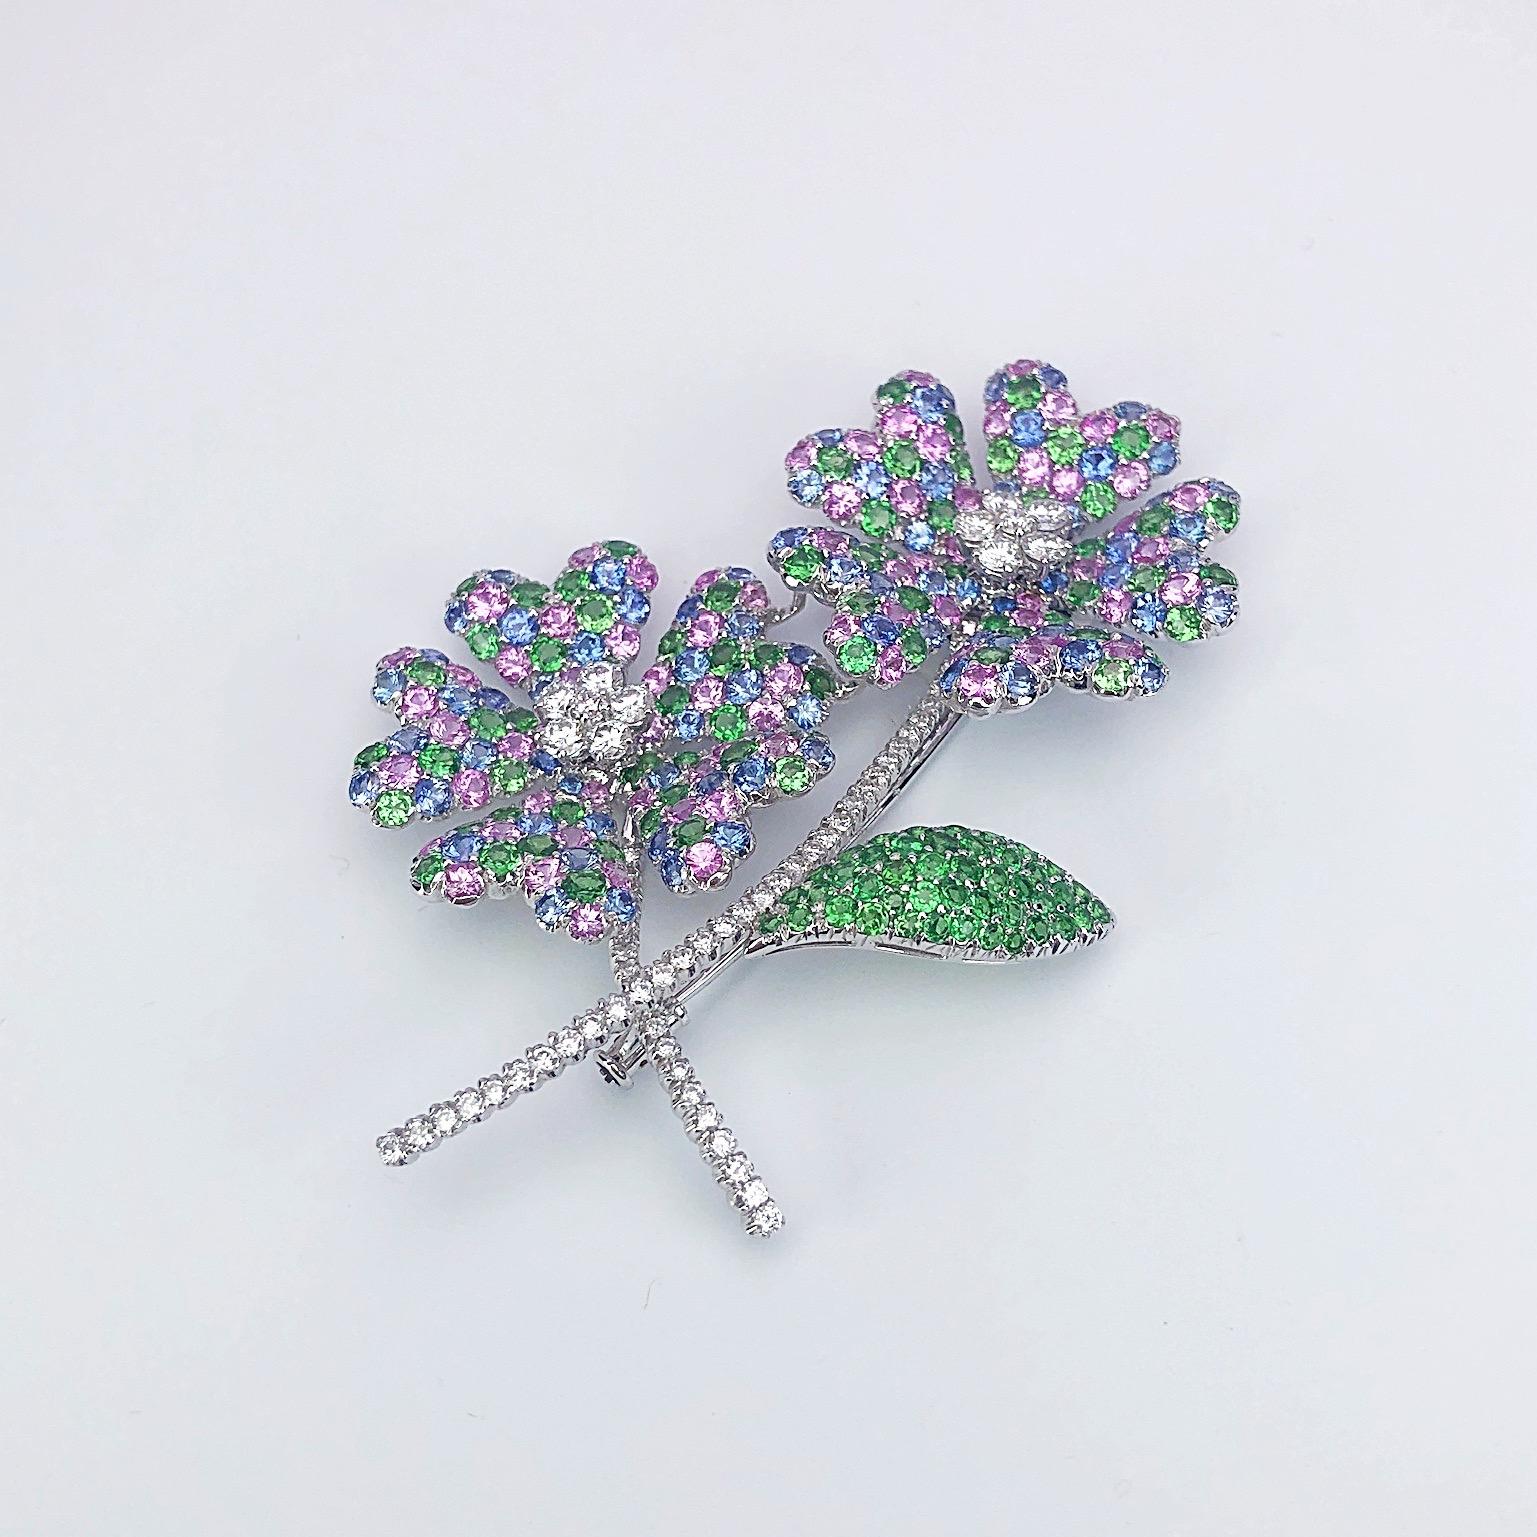 18 karat white gold brooch designed with two pastel hued flowers. The petals are set with round  pink and blue sapphires and green tsavorites. The center of each flower and their stems are set with round brilliant diamonds. One leaf is set with